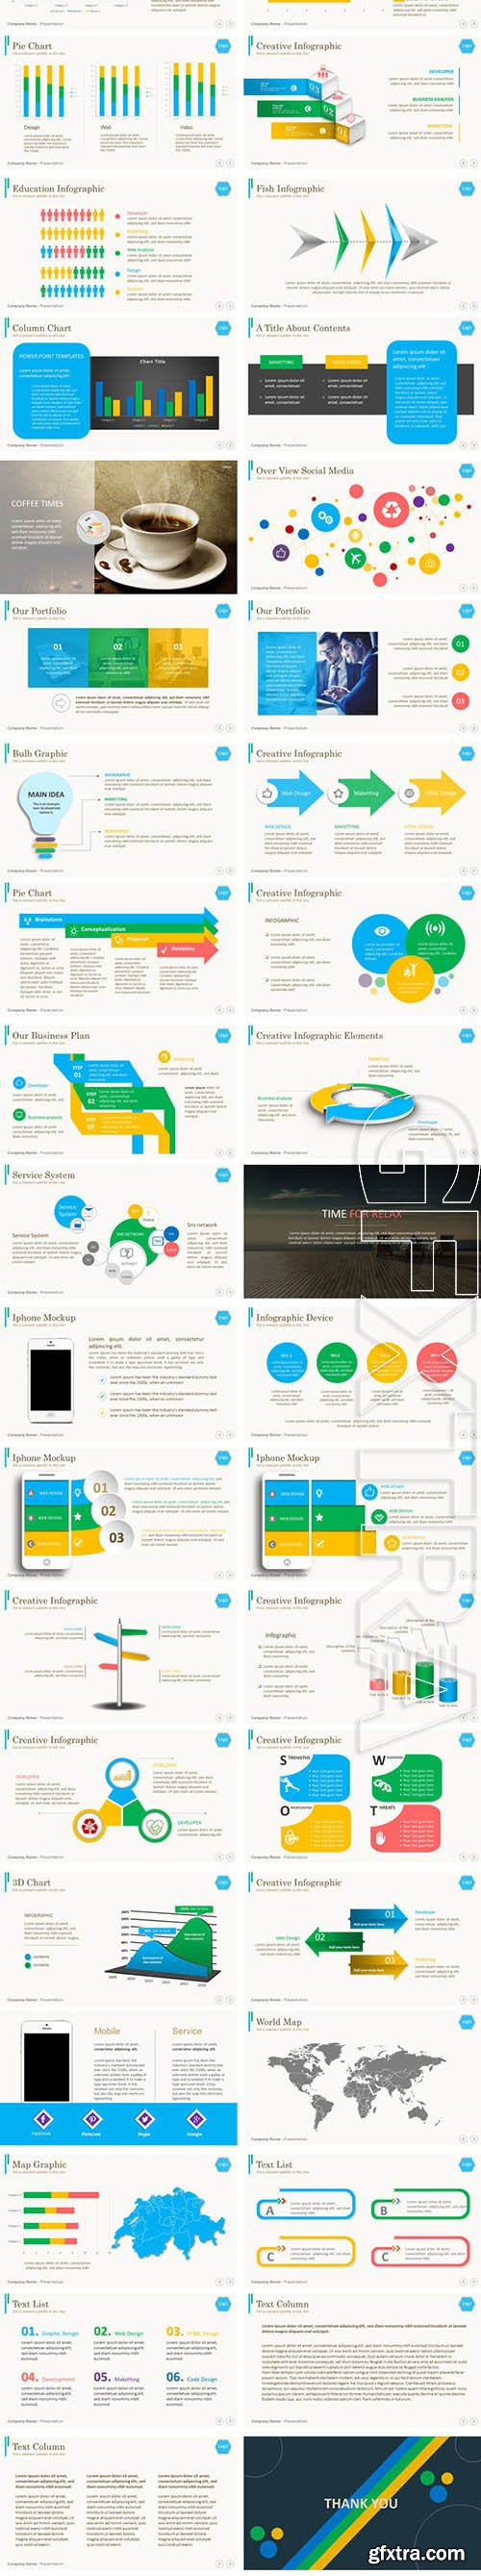 Business Report Powerpoint - GraphicRiver 9997999